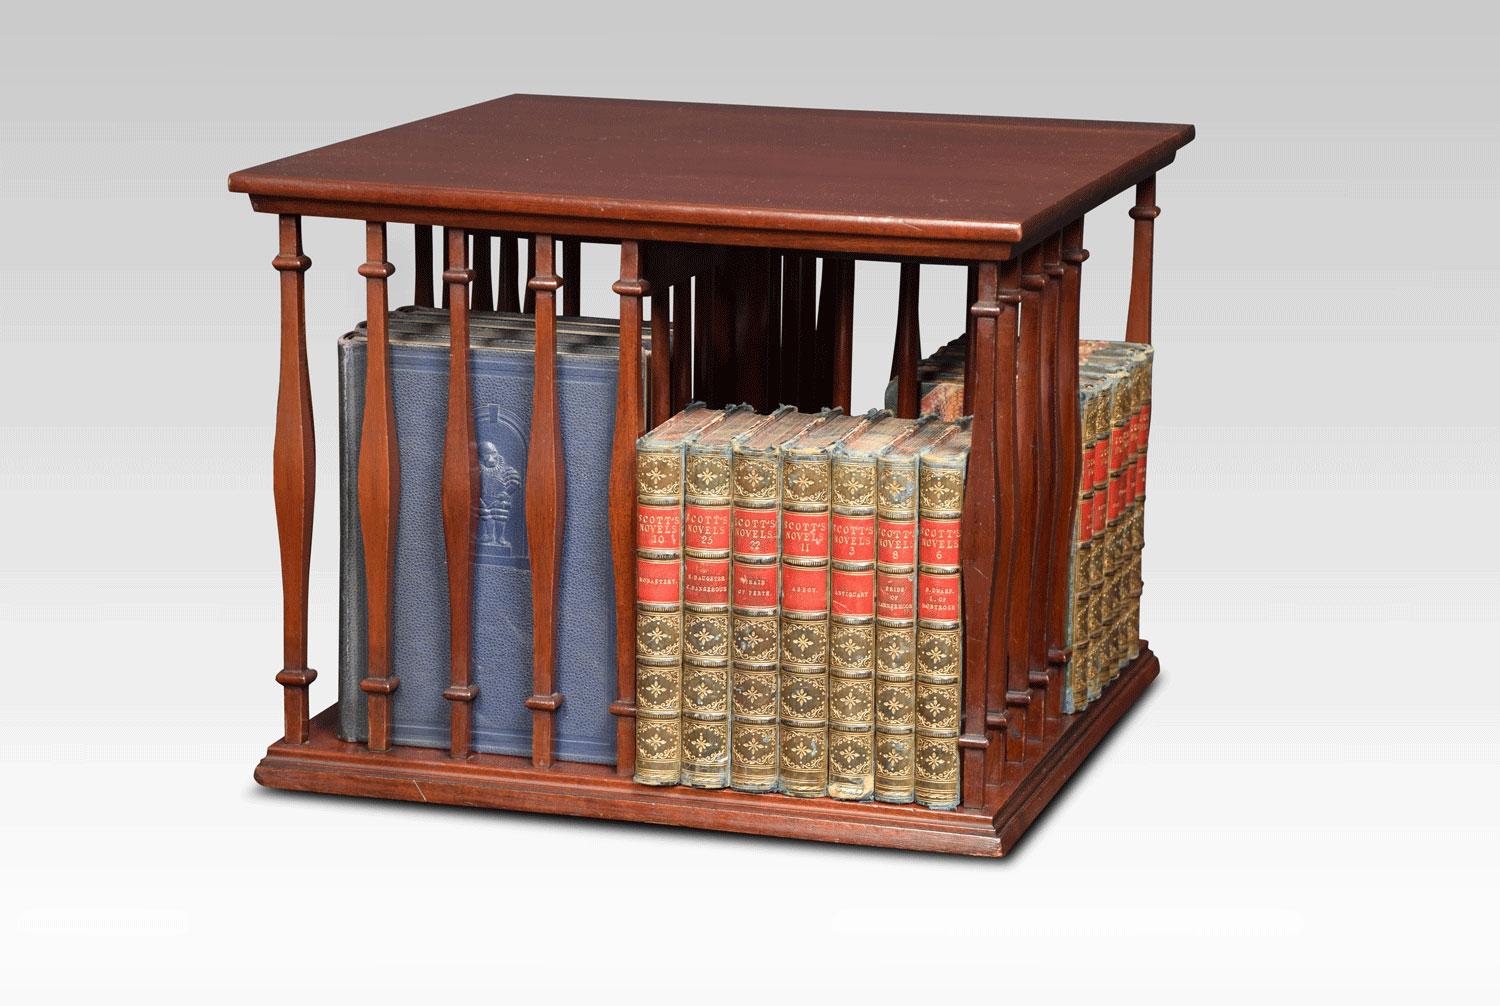 Edwardian revolving bookcase, the square mahogany top supported on turned spindles with four book shelves. All raised up on revolving base.
Dimensions:
Height 13 inches
Width 15 inches
Depth 15 inches.